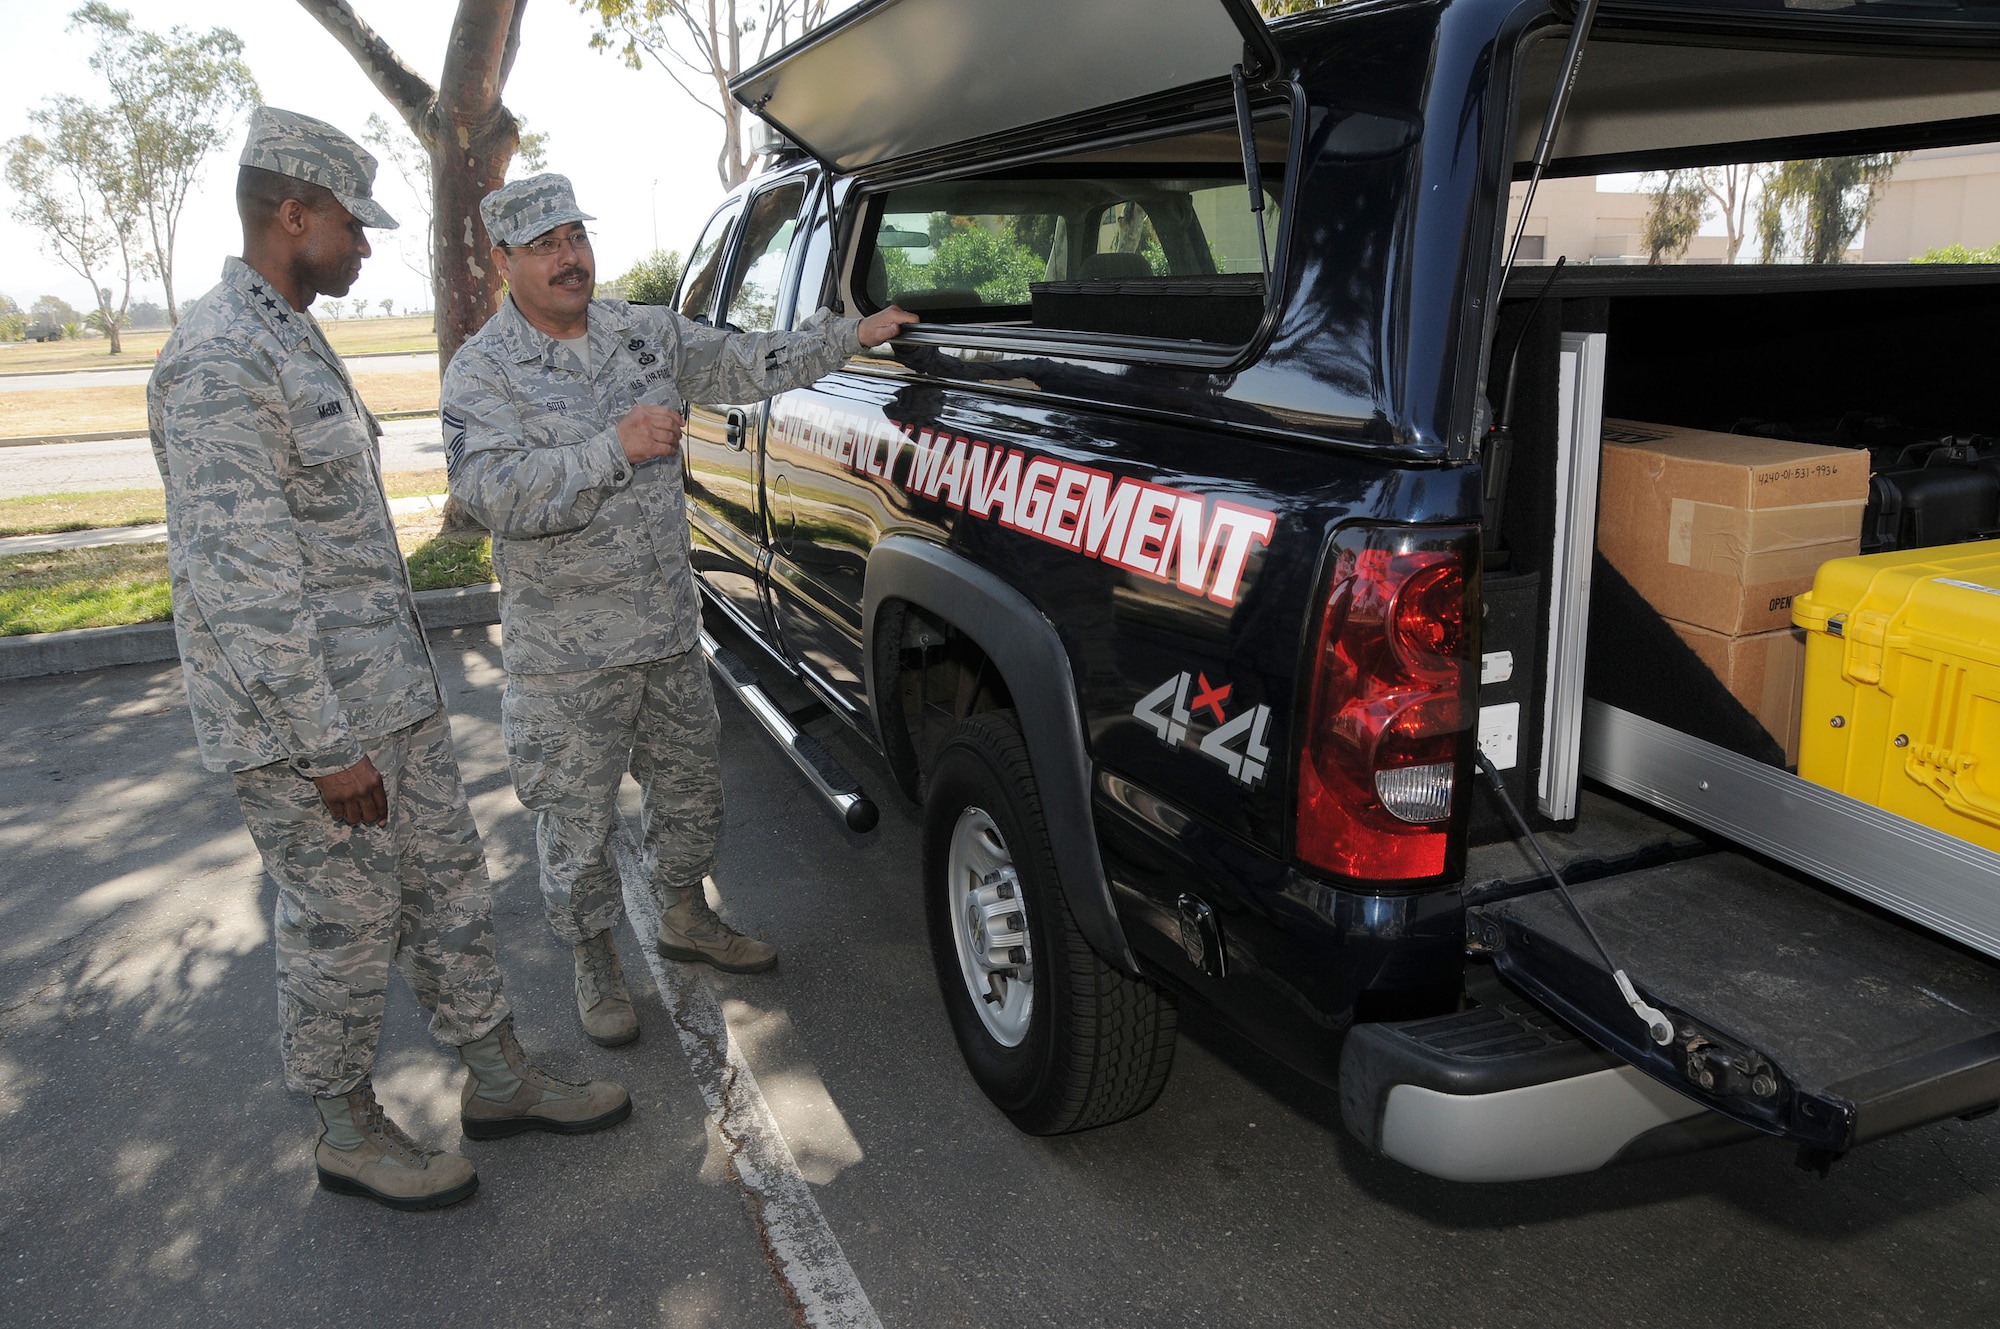 Lt. Gen. Darren McDew commander of the 18th Air Force is briefed by Senior Master Sgt. Oscar Soto of the 146th Emergency Management office, California Air National Guard,  on the capabilities of the crash response truck his office assembled on May 11, 2013. McDew?s visit was part of an overall familiarization tour of the missions and facilities at the 146th Airlift Wing, California Air National Guard, Port Hueneme, Ca. Air National Guard photo by Master Sgt. Dave Buttner